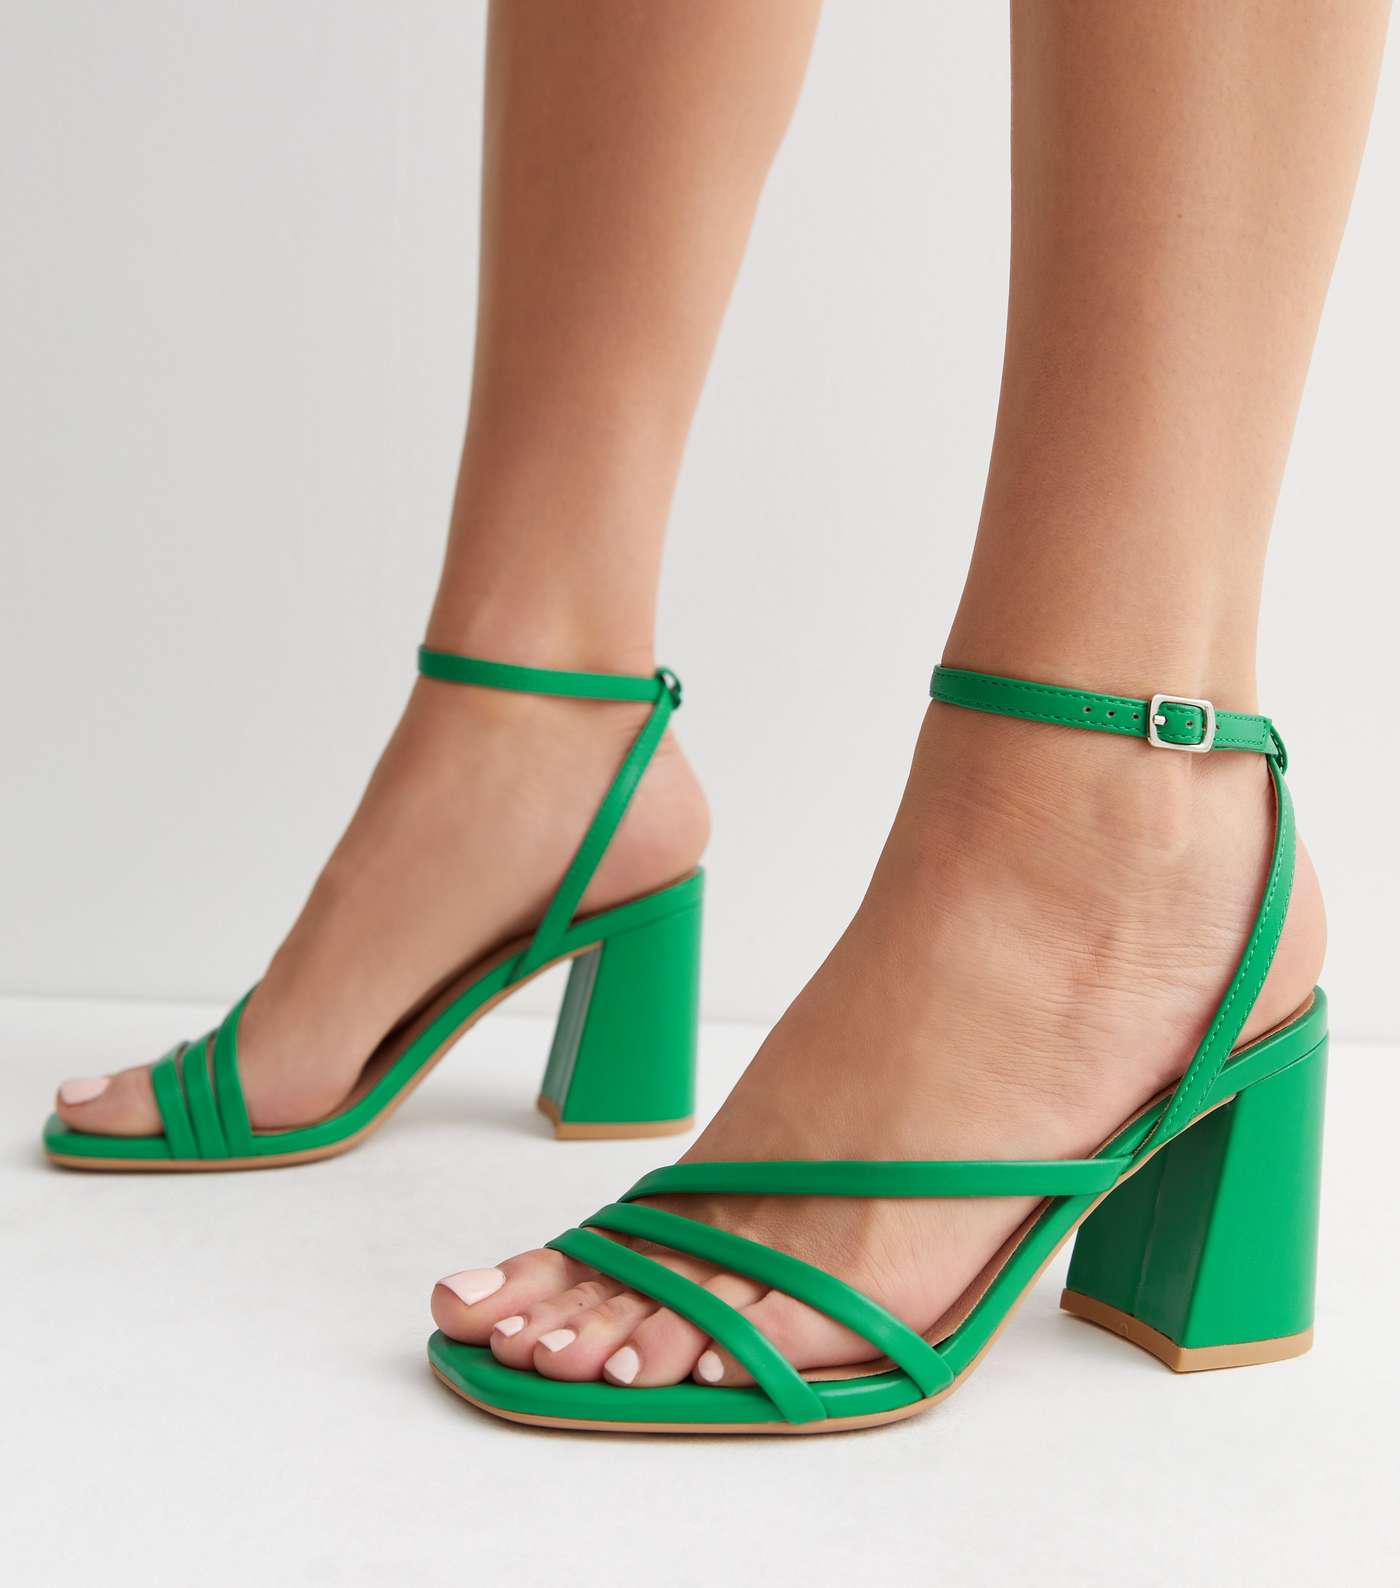 Green Leather-Look Strappy Block Heel Sandals Image 2